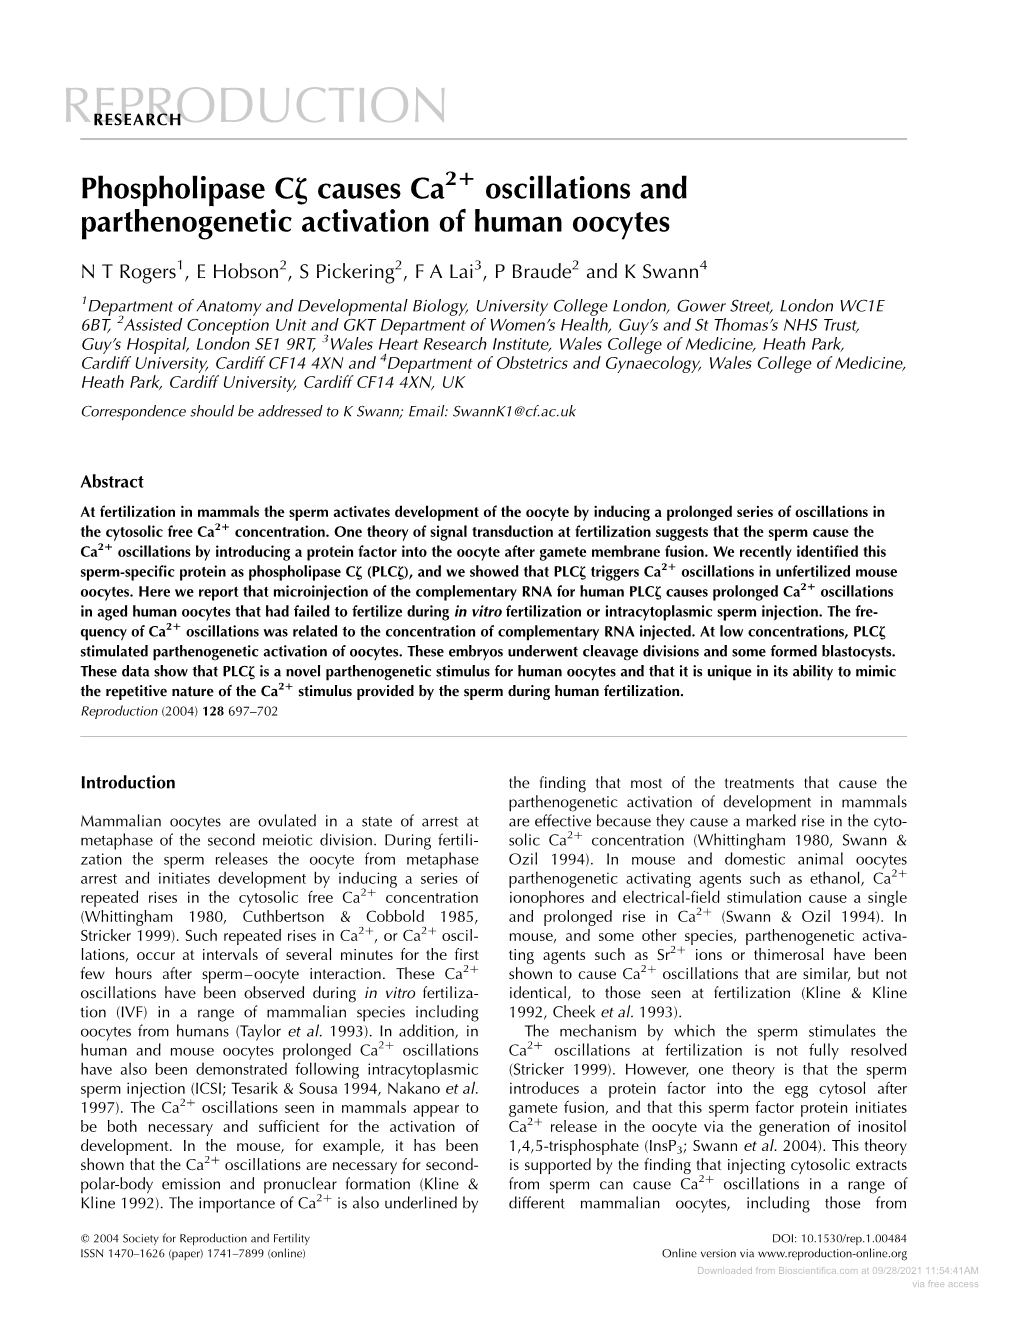 Phospholipase Cζ Causes Ca2+ Oscillations and Parthenogenetic Activation of Human Oocytes